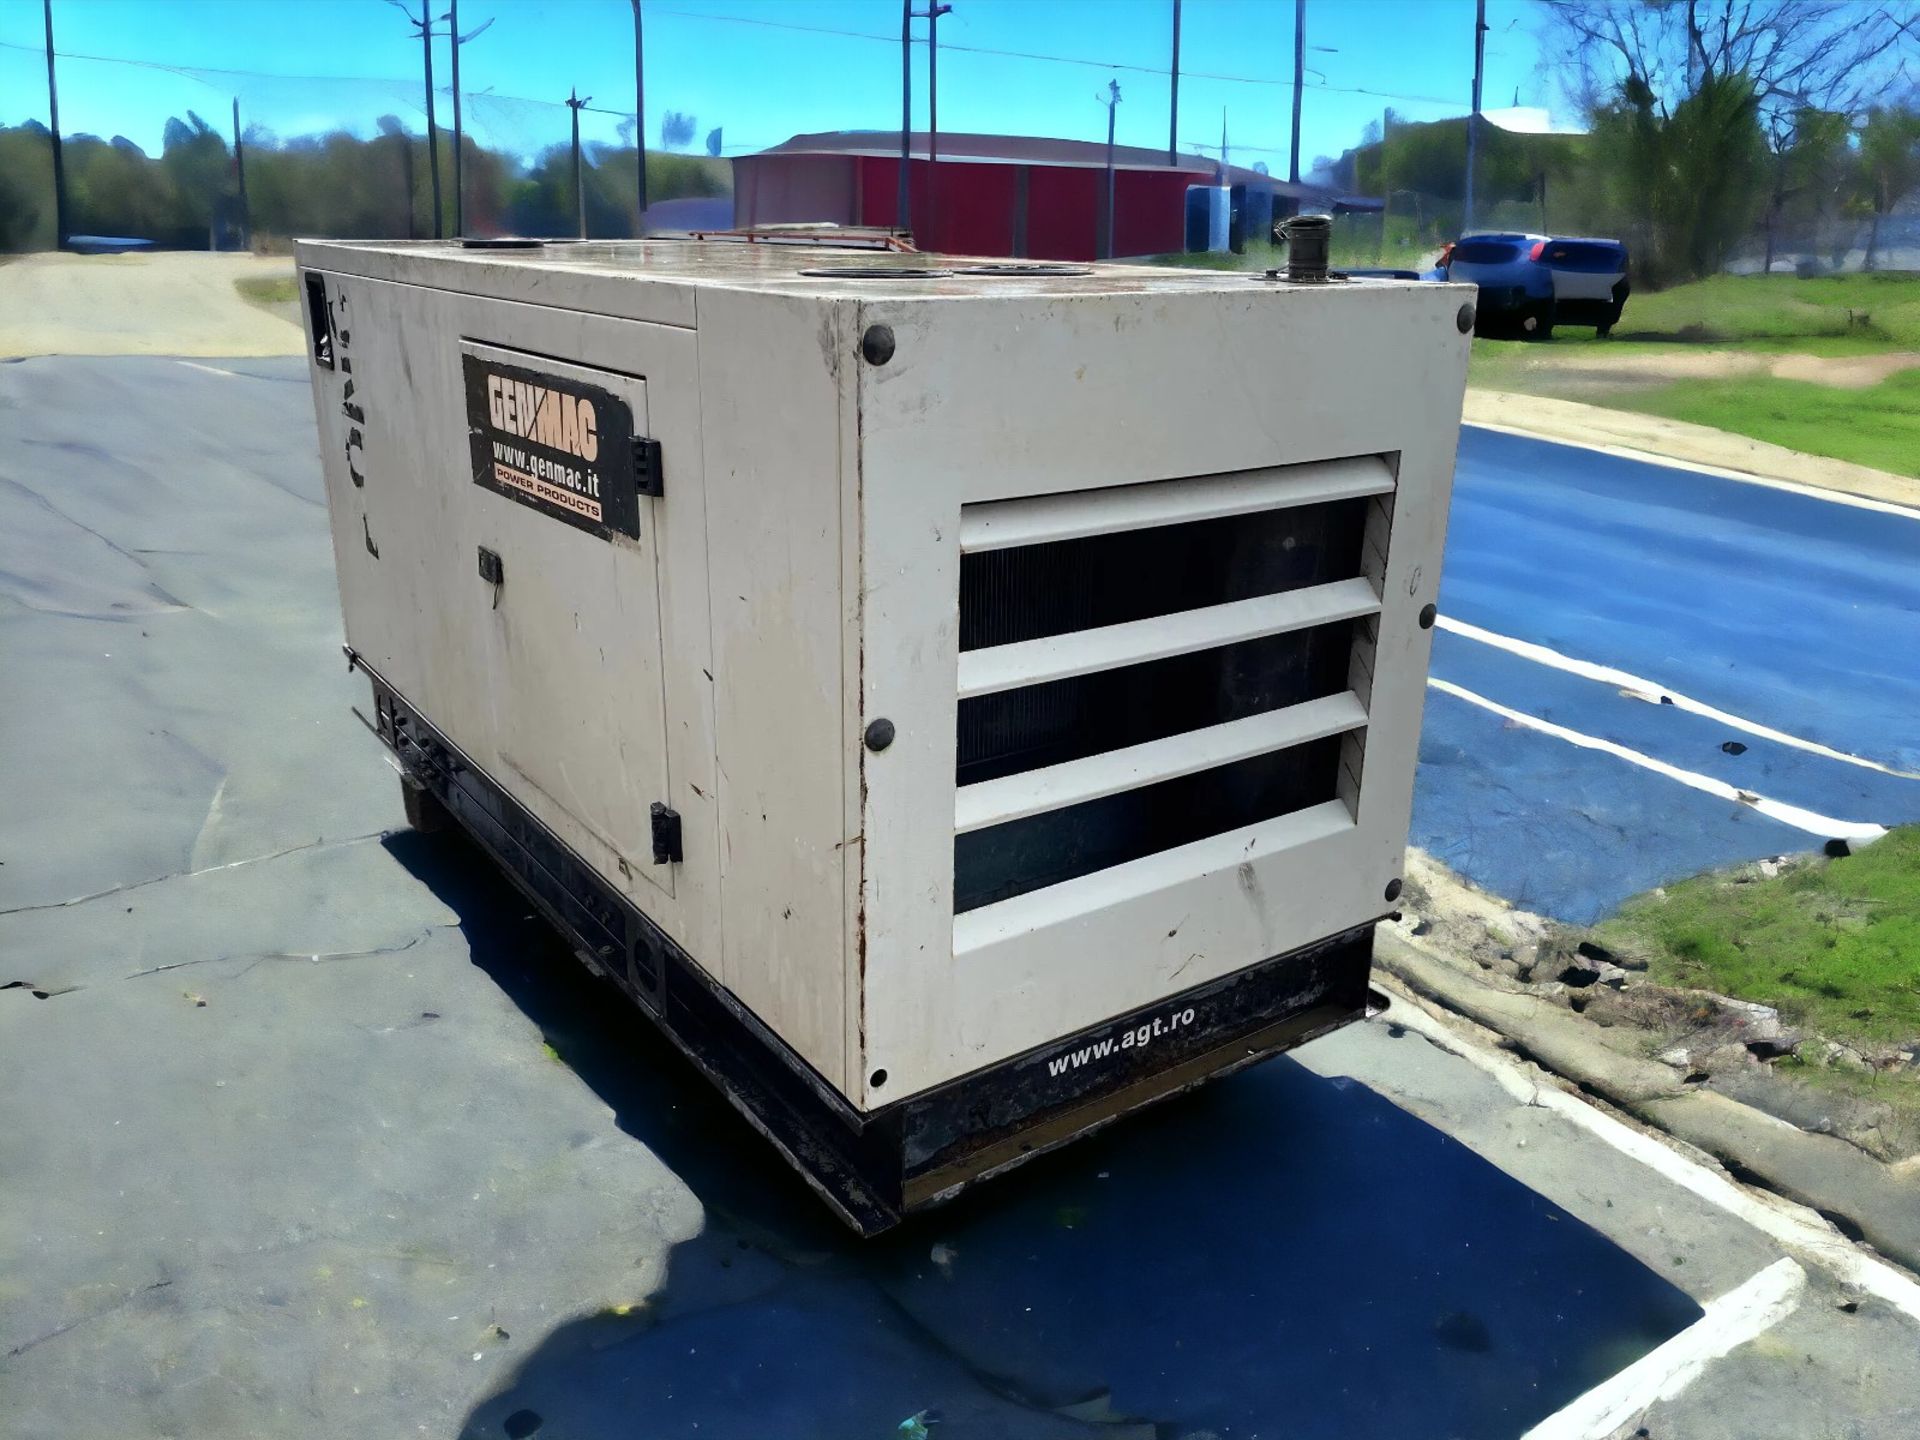 POWER UP YOUR PROJECTS WITH THE GENMAC 80 KVA SILENT GENERATOR - Bild 4 aus 11